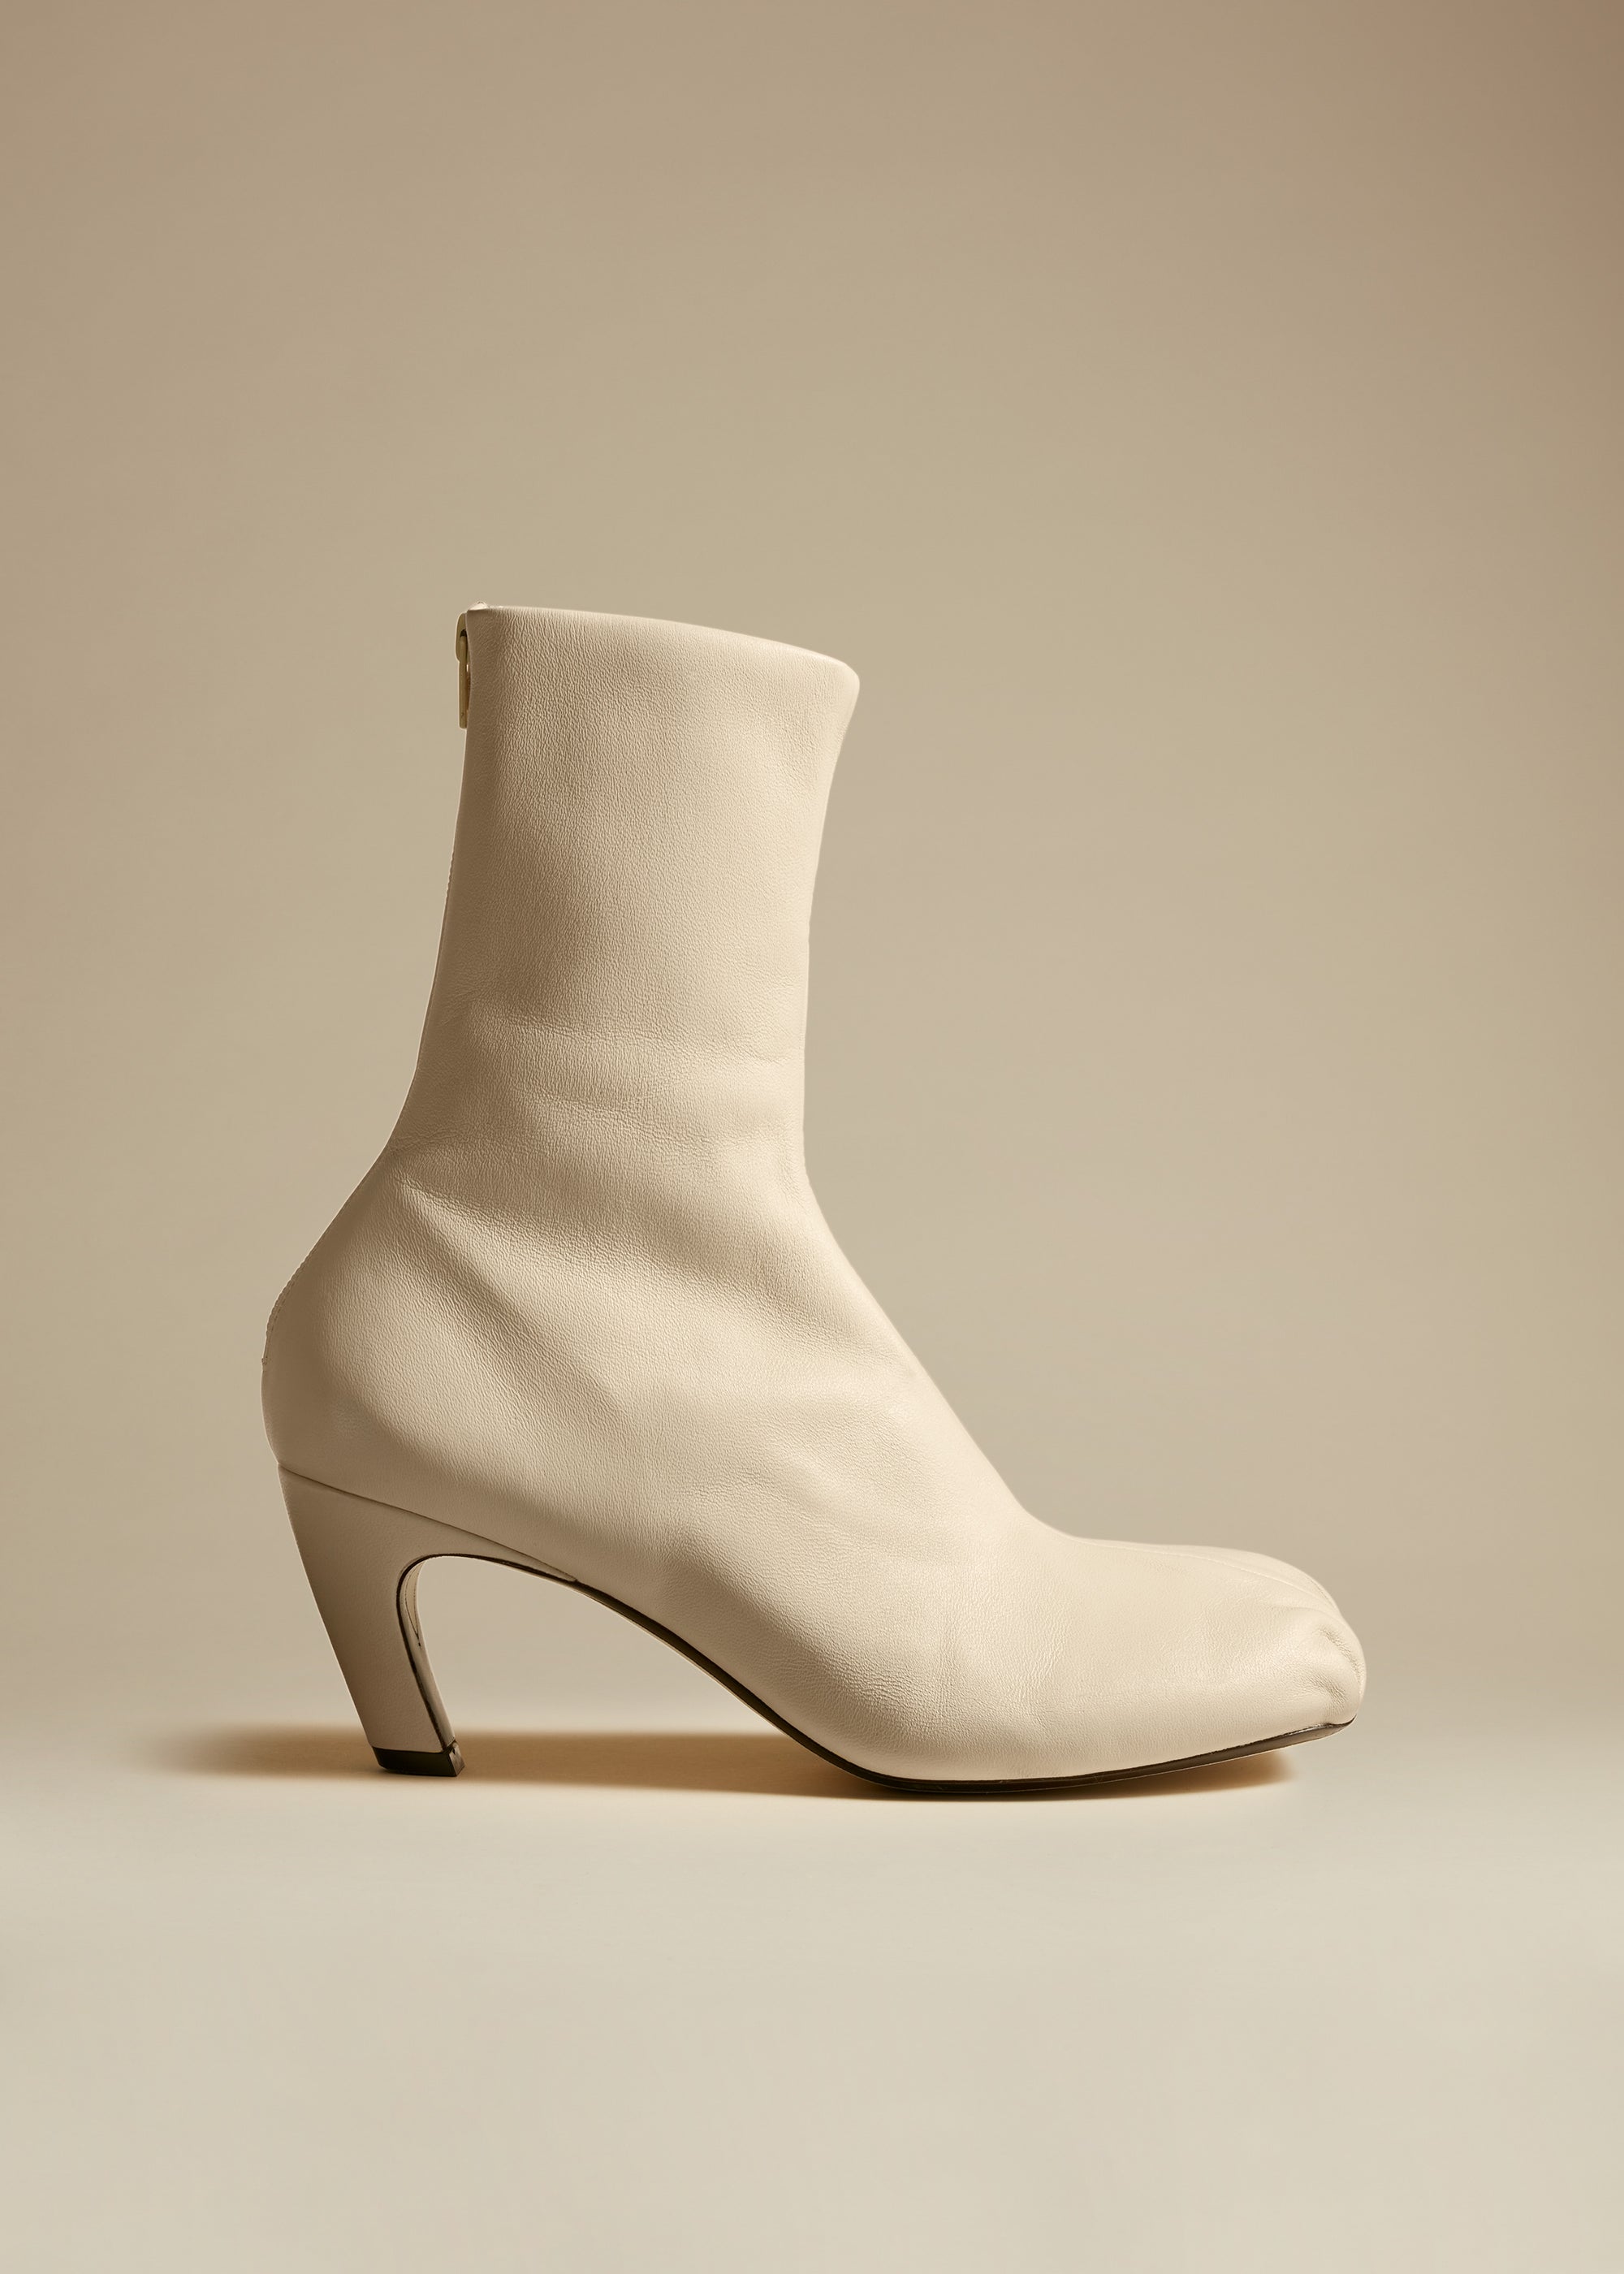 Normandy boot in leather - Cream